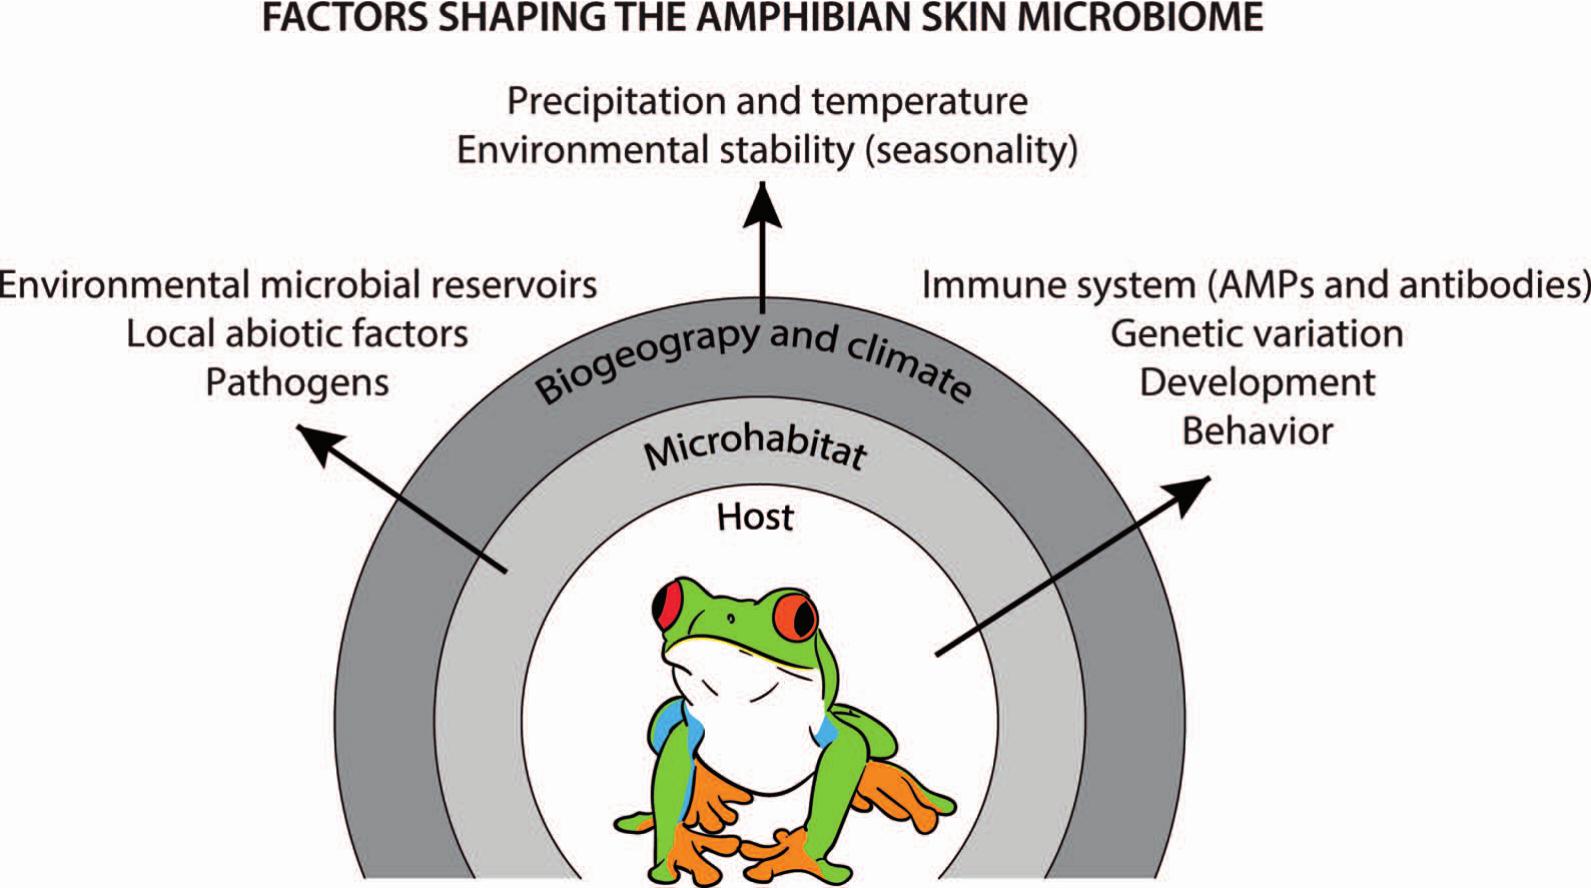 The Amphibian Skin Microbiome and Its Protective Role Against